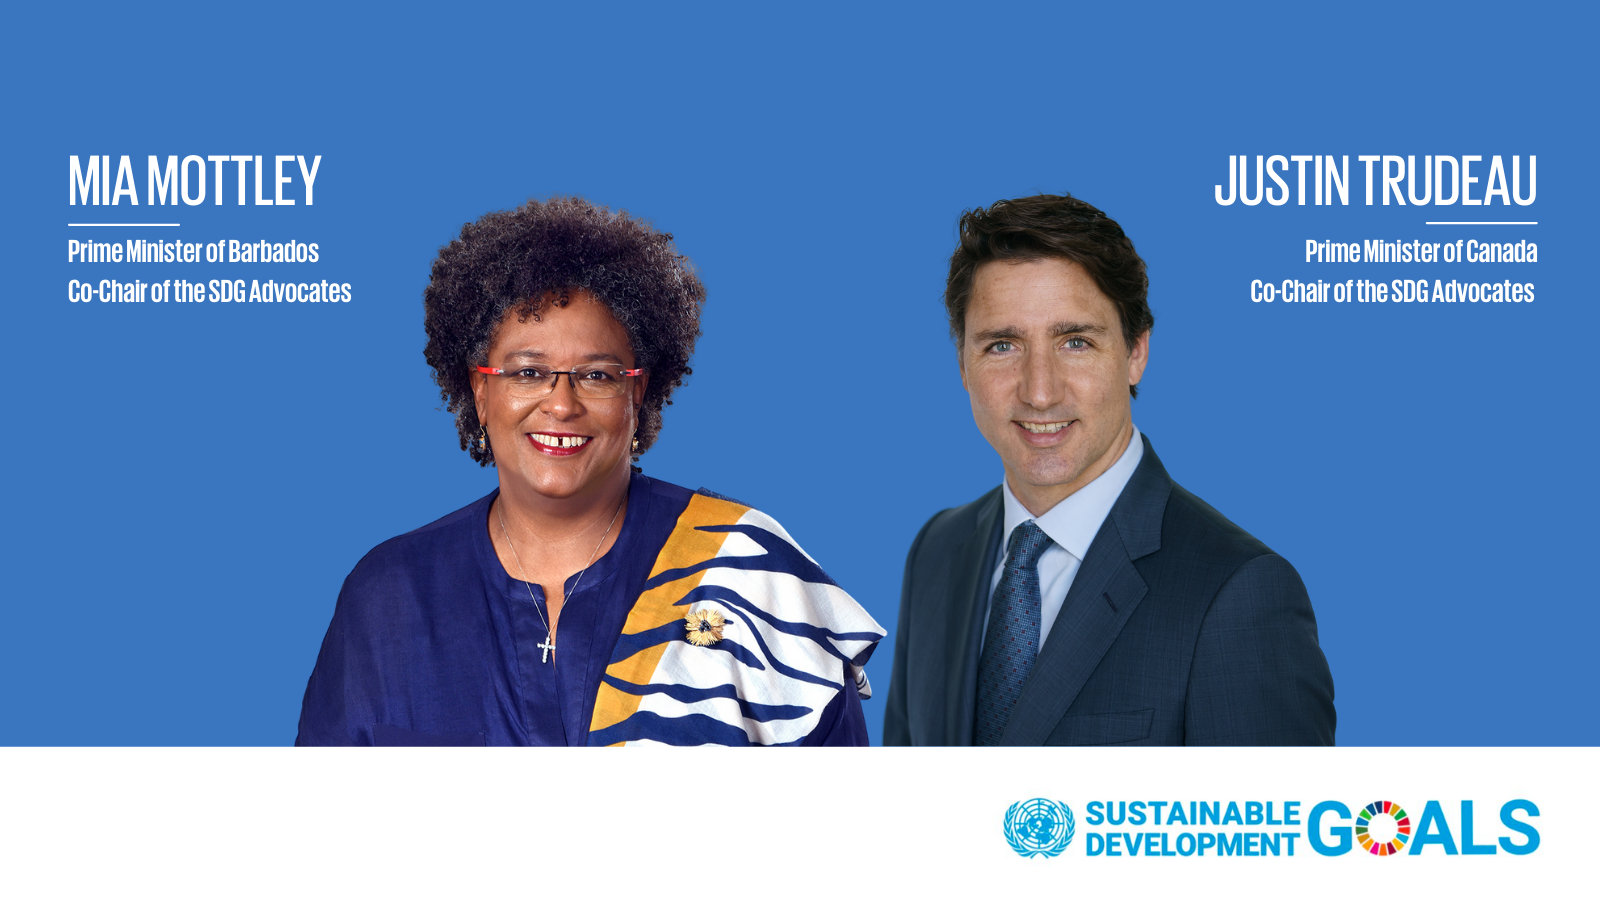 UN Secretary-General António Guterres announces the Prime Minister of Barbados and Prime Minister of Canada as the new Co-Chairs of the SDG Advocates group    